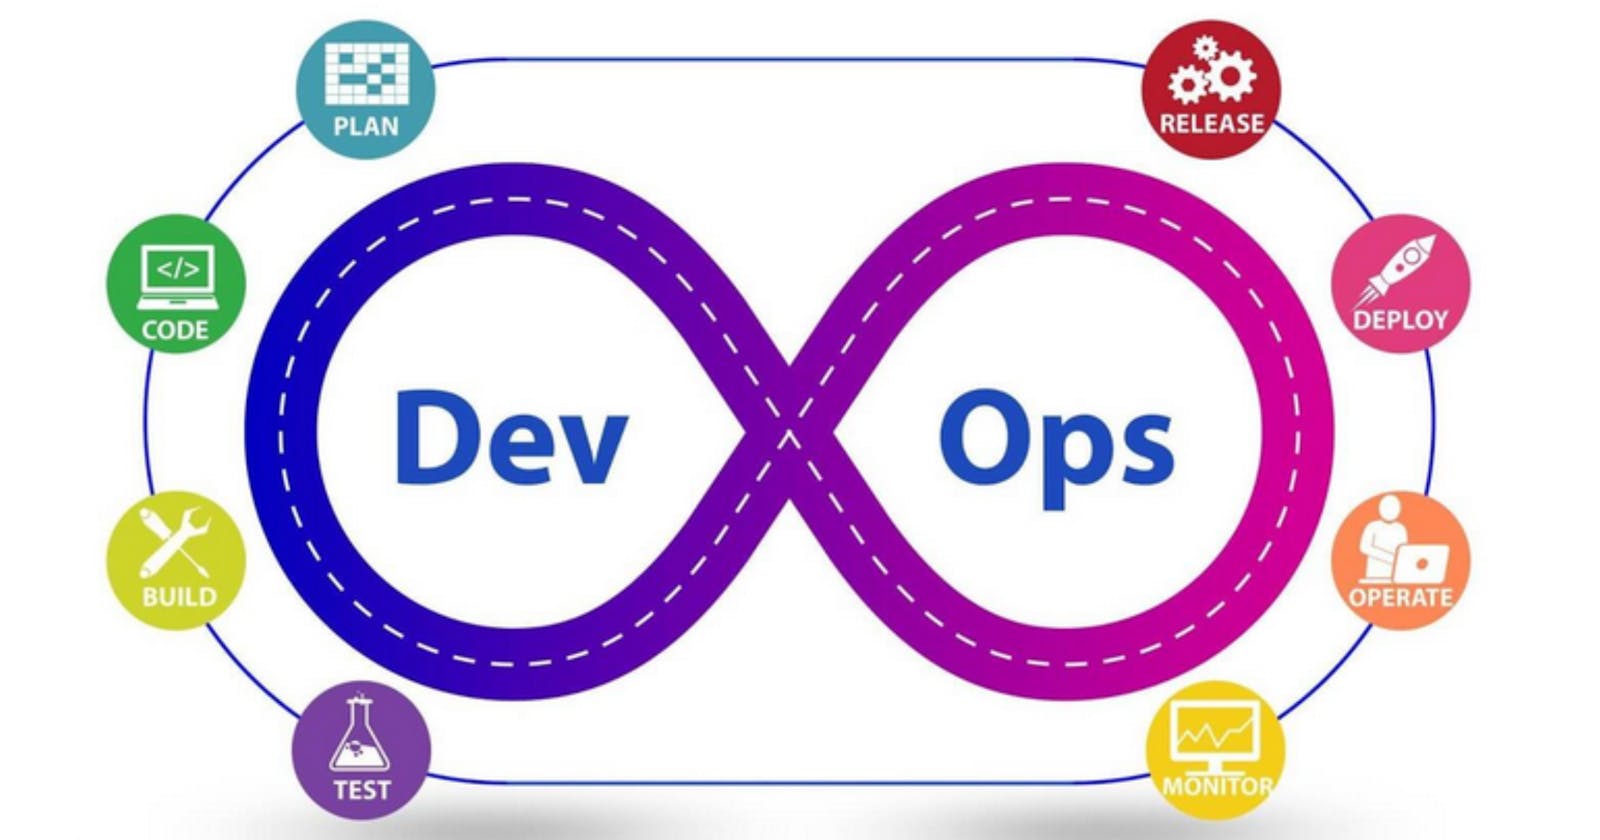 Getting started with Devops